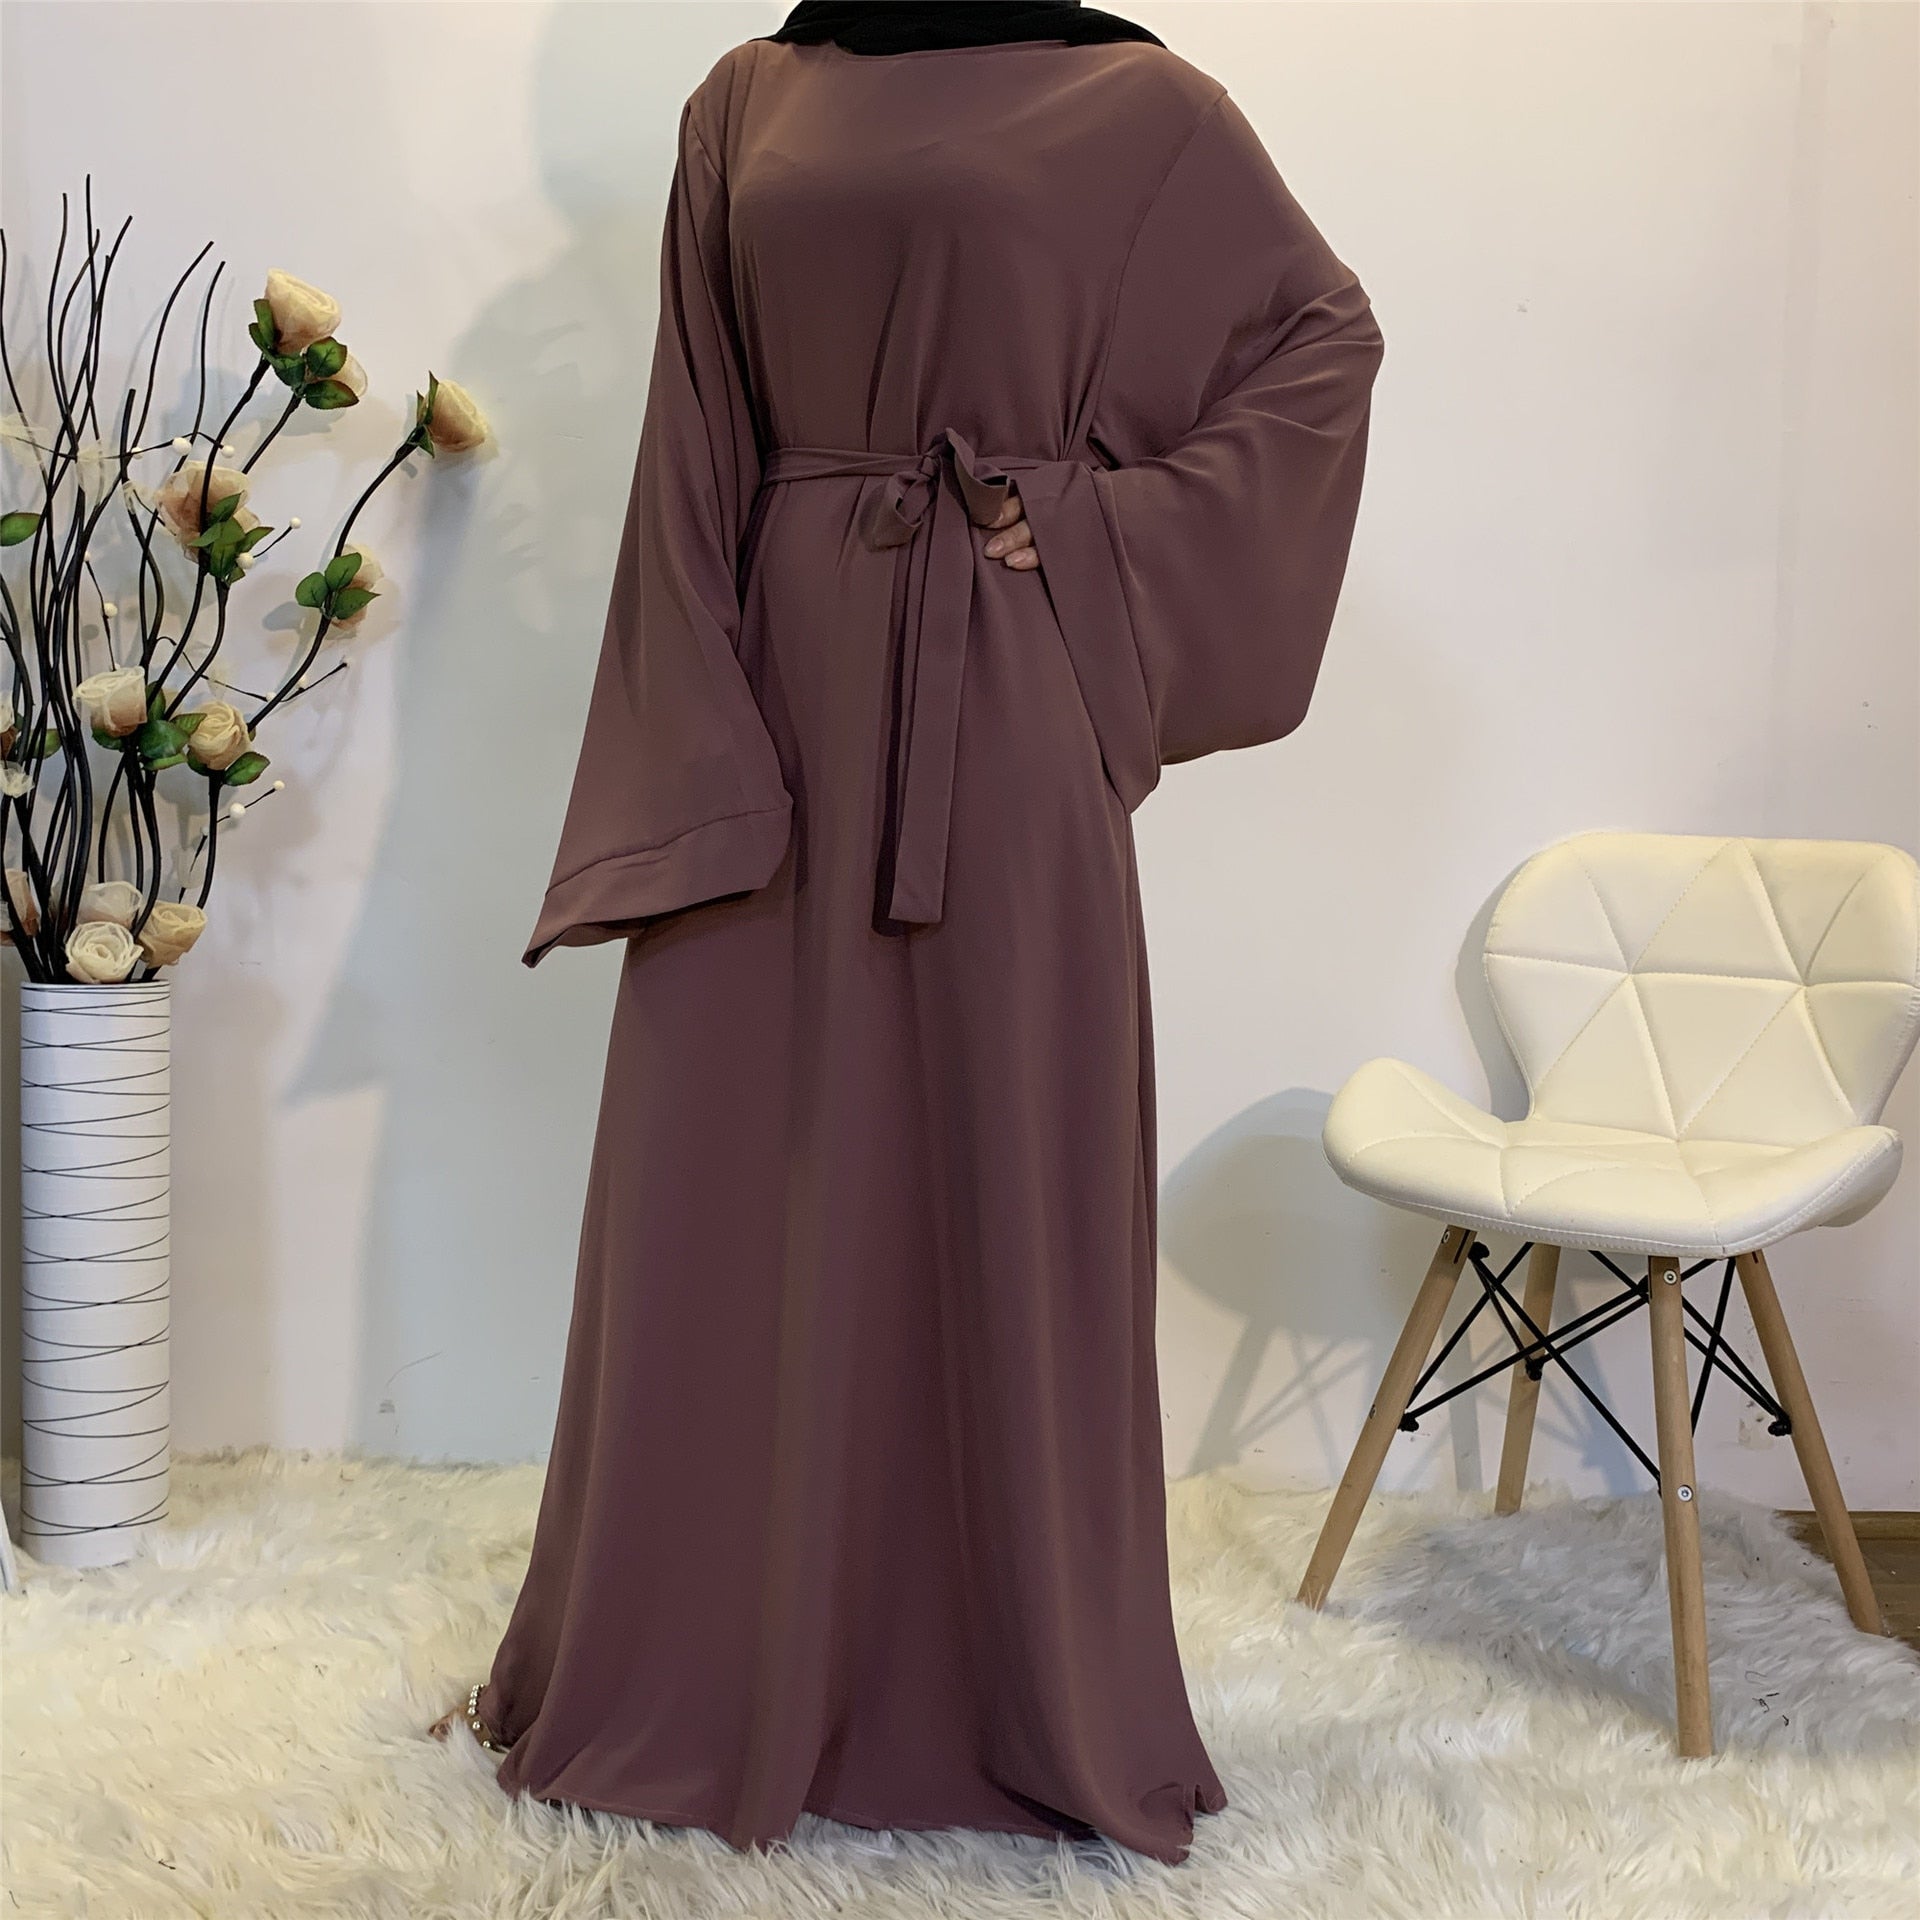 Chic and Modest: Muslim Fashion Hijab Dubai Abaya Long Dresses with Sashes for Women - Flexi Africa - Free Delivery Worldwide